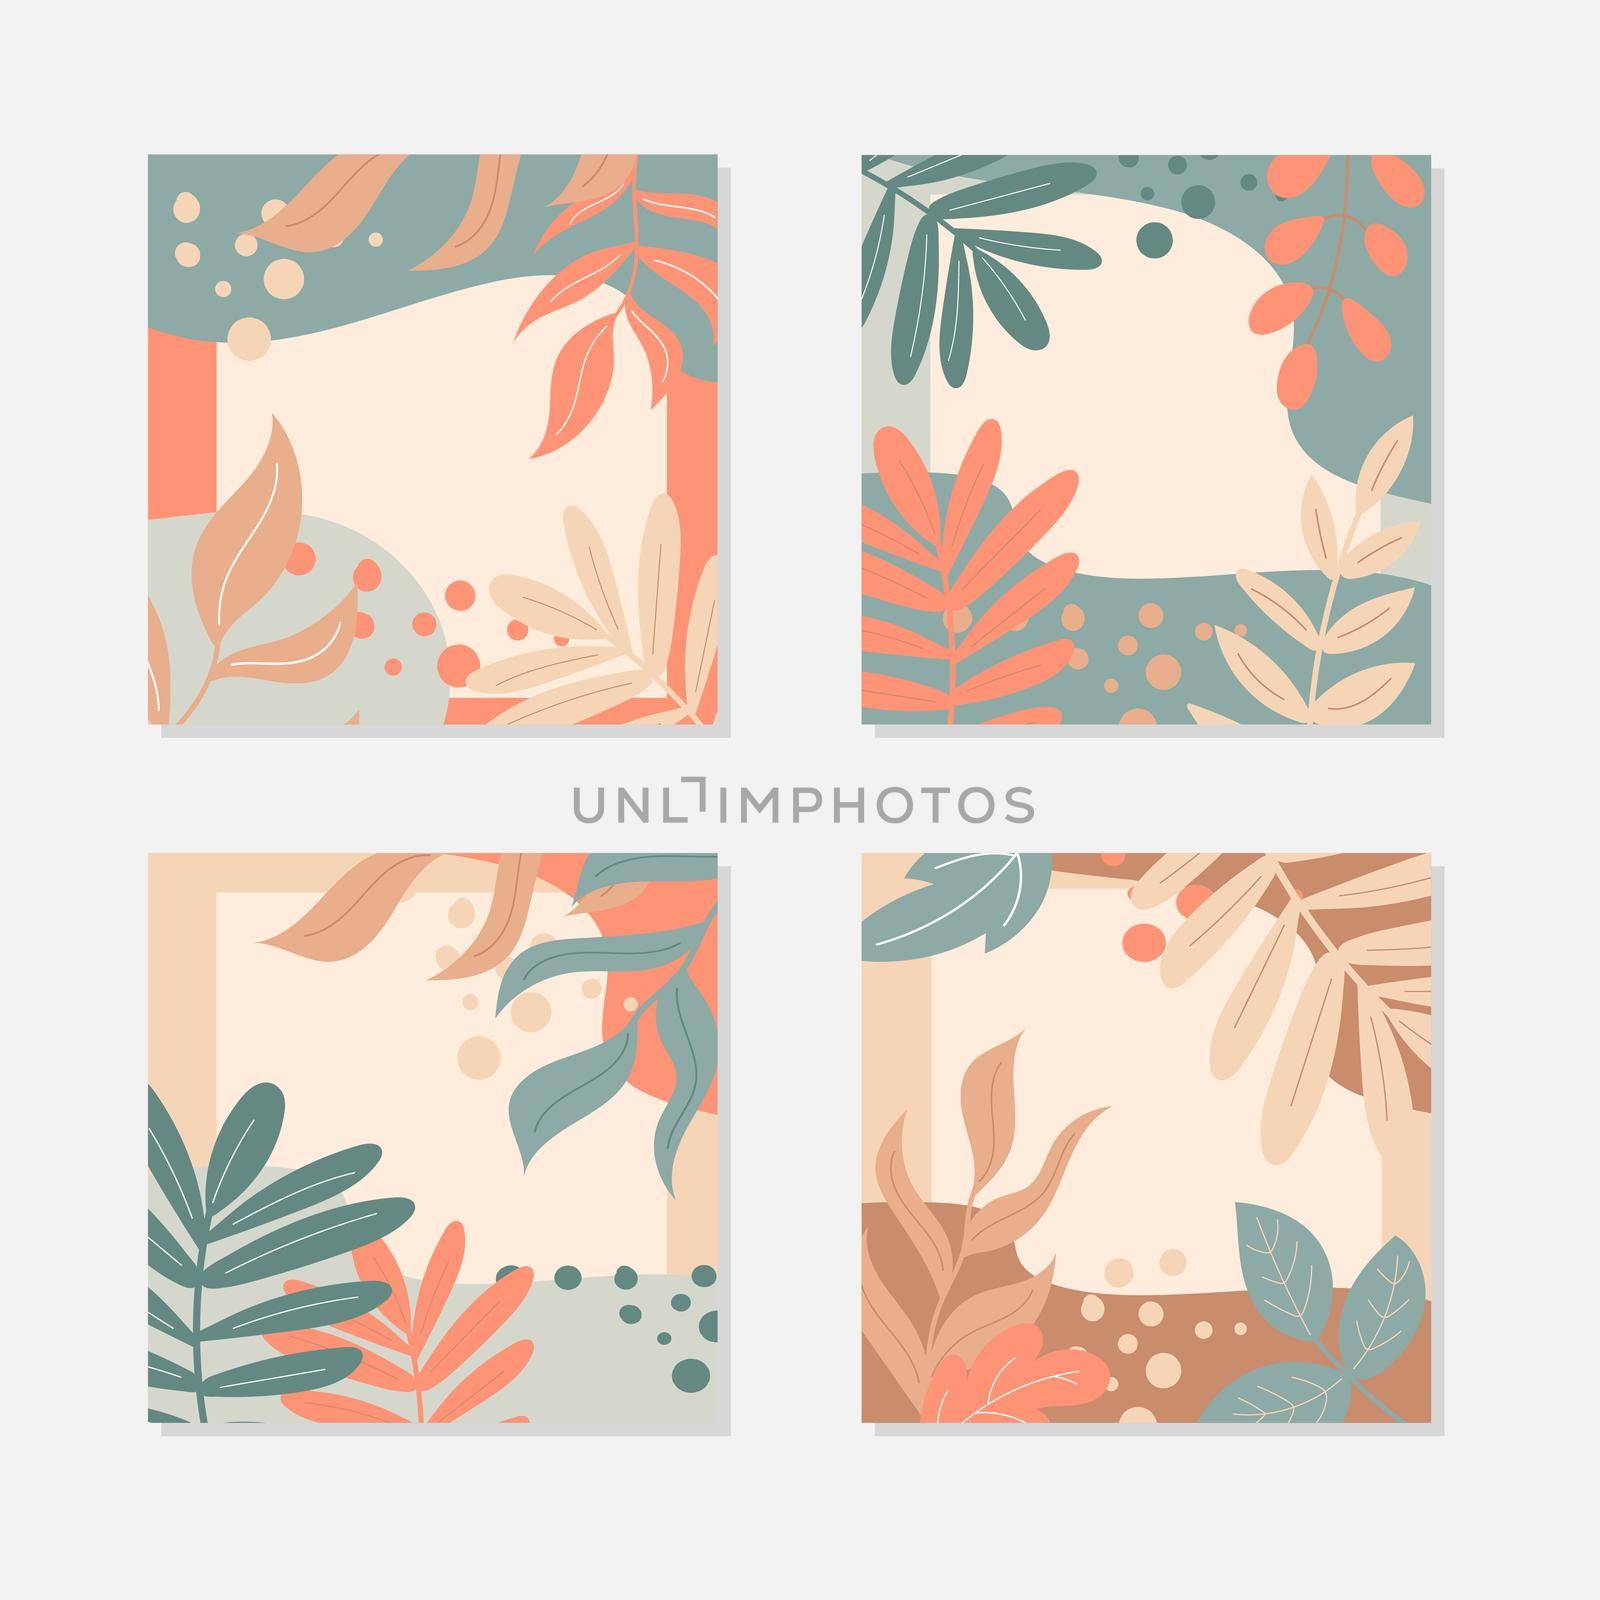 Abstract leaves art. A set of square postcards in pastel colors. Autumn leaves and decor elements. Vector illustration